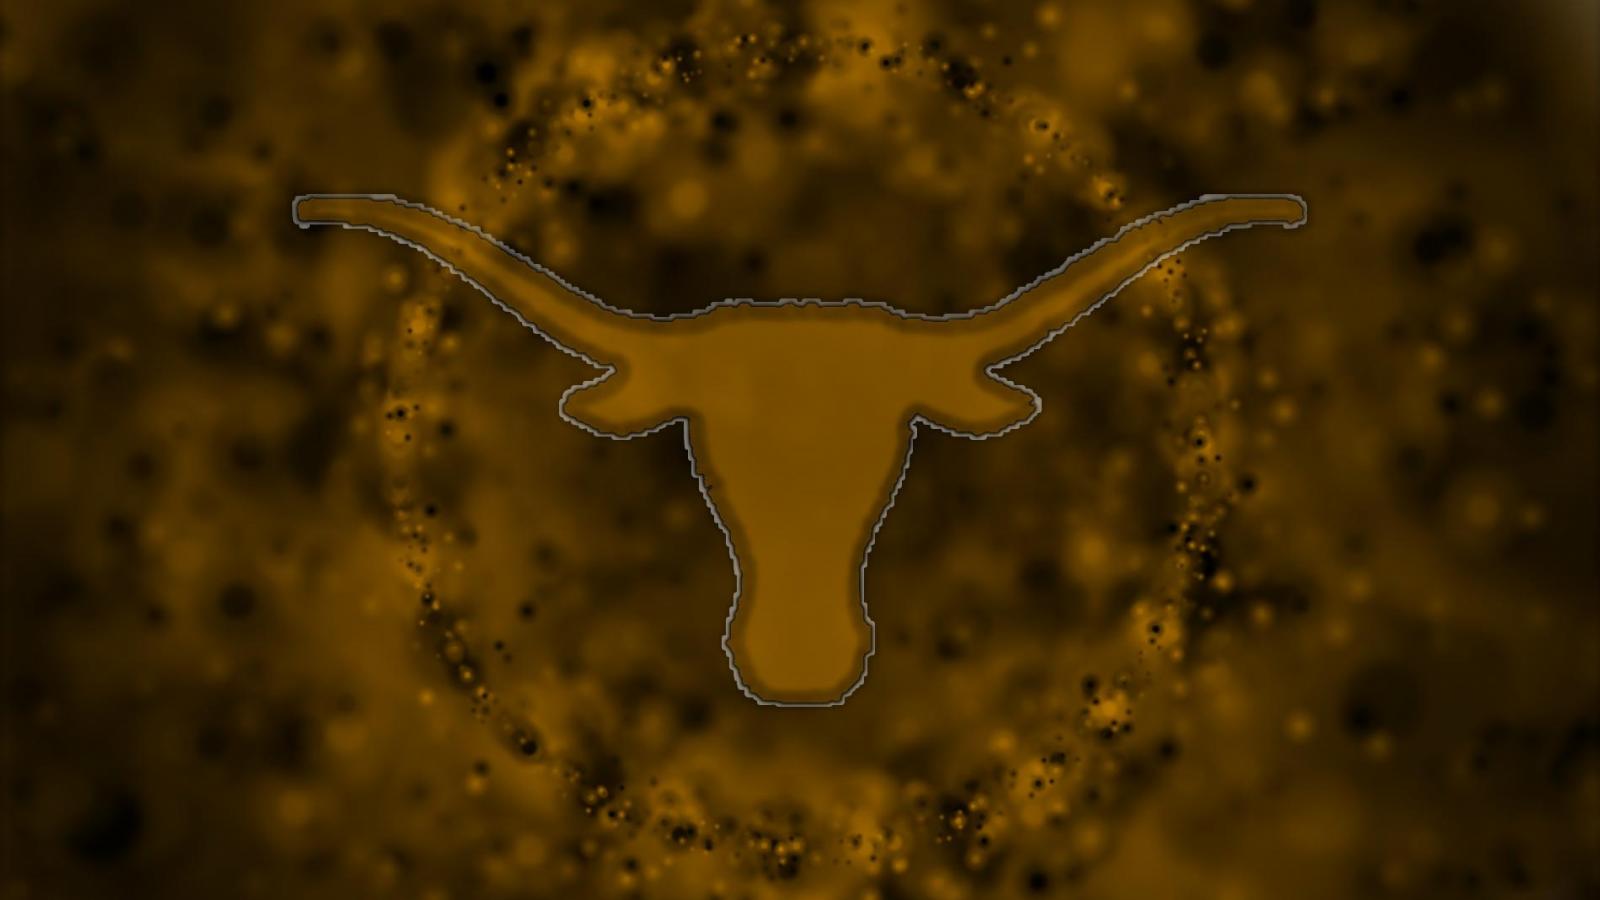 TEXAS LONGHORNS WITH ABSTRACT BACKGROUND WALLPAPER   45062   HD